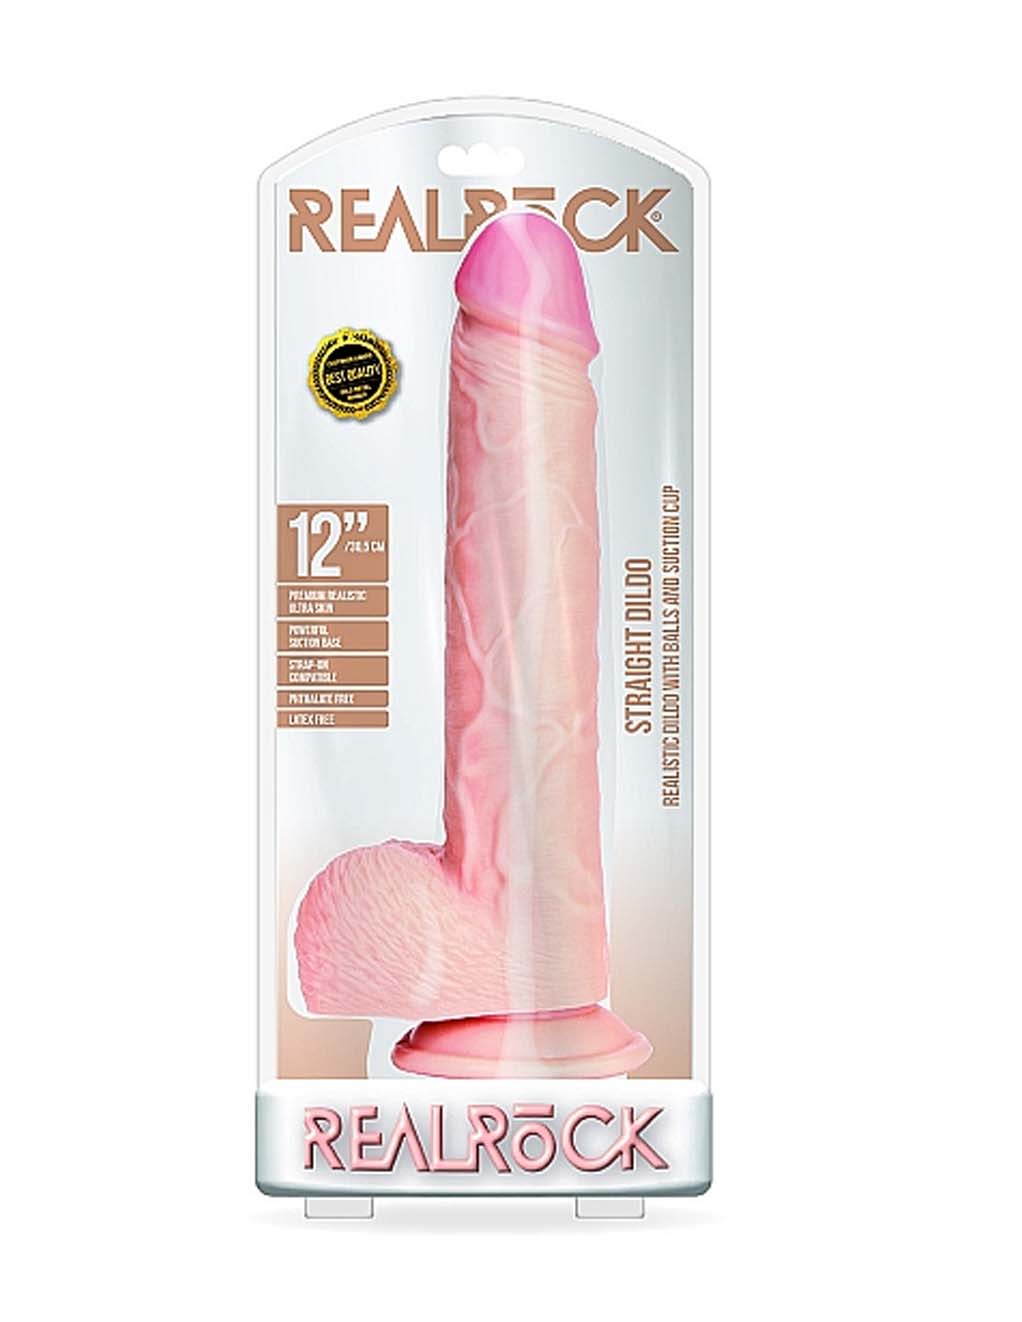 Real Rock Realistic 12" Dong with Balls- Box